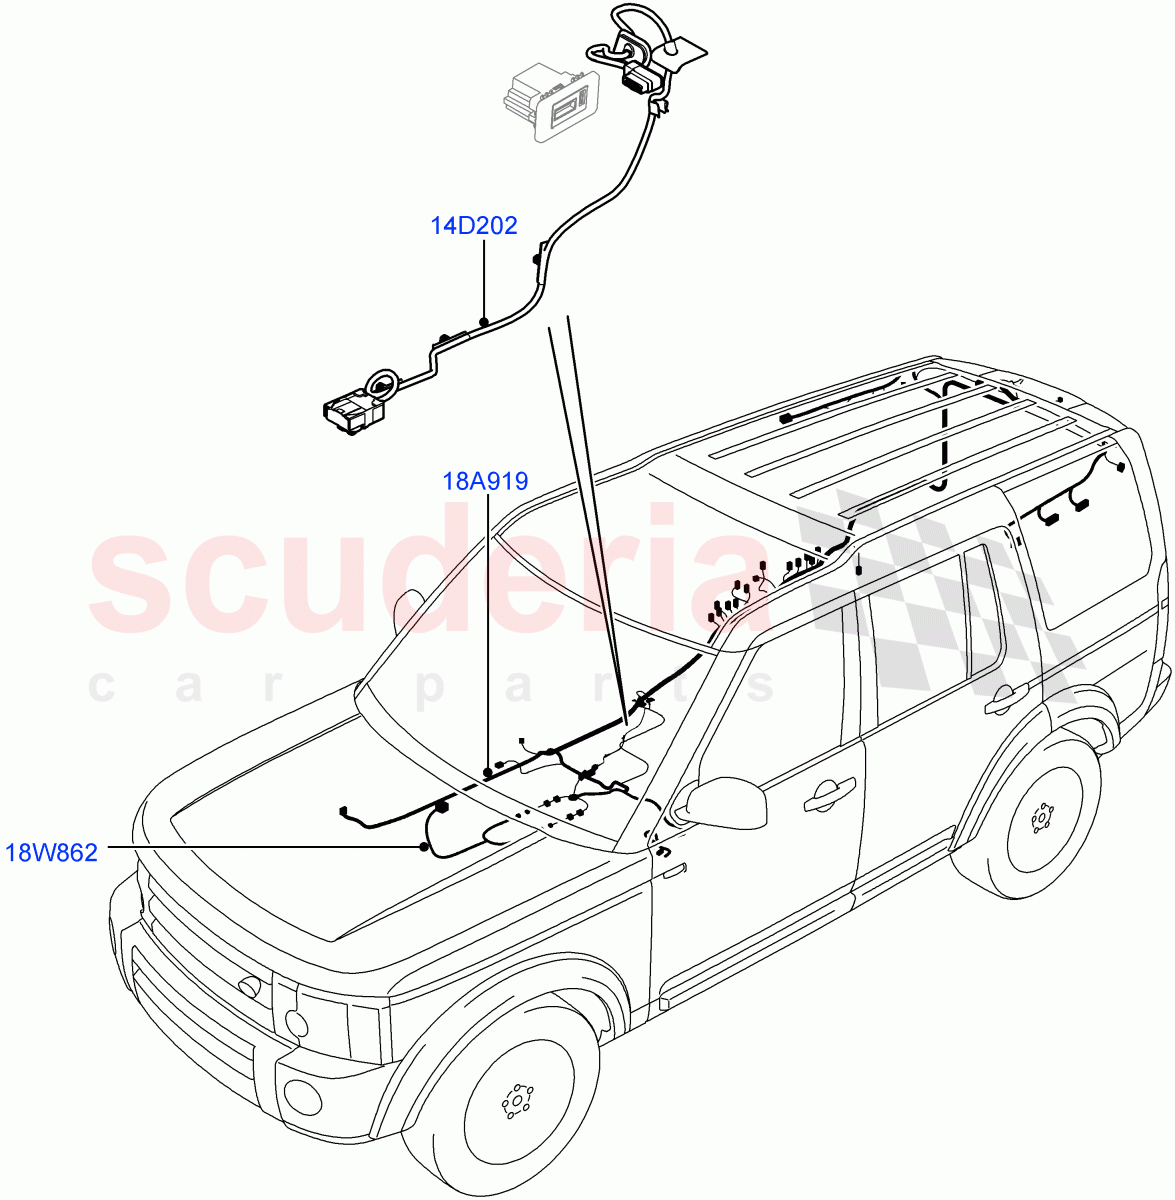 Electrical Wiring - Body And Rear(Audio/Navigation/Entertainment)((V)FROMBA000001,(V)TOBA999999) of Land Rover Land Rover Discovery 4 (2010-2016) [4.0 Petrol V6]